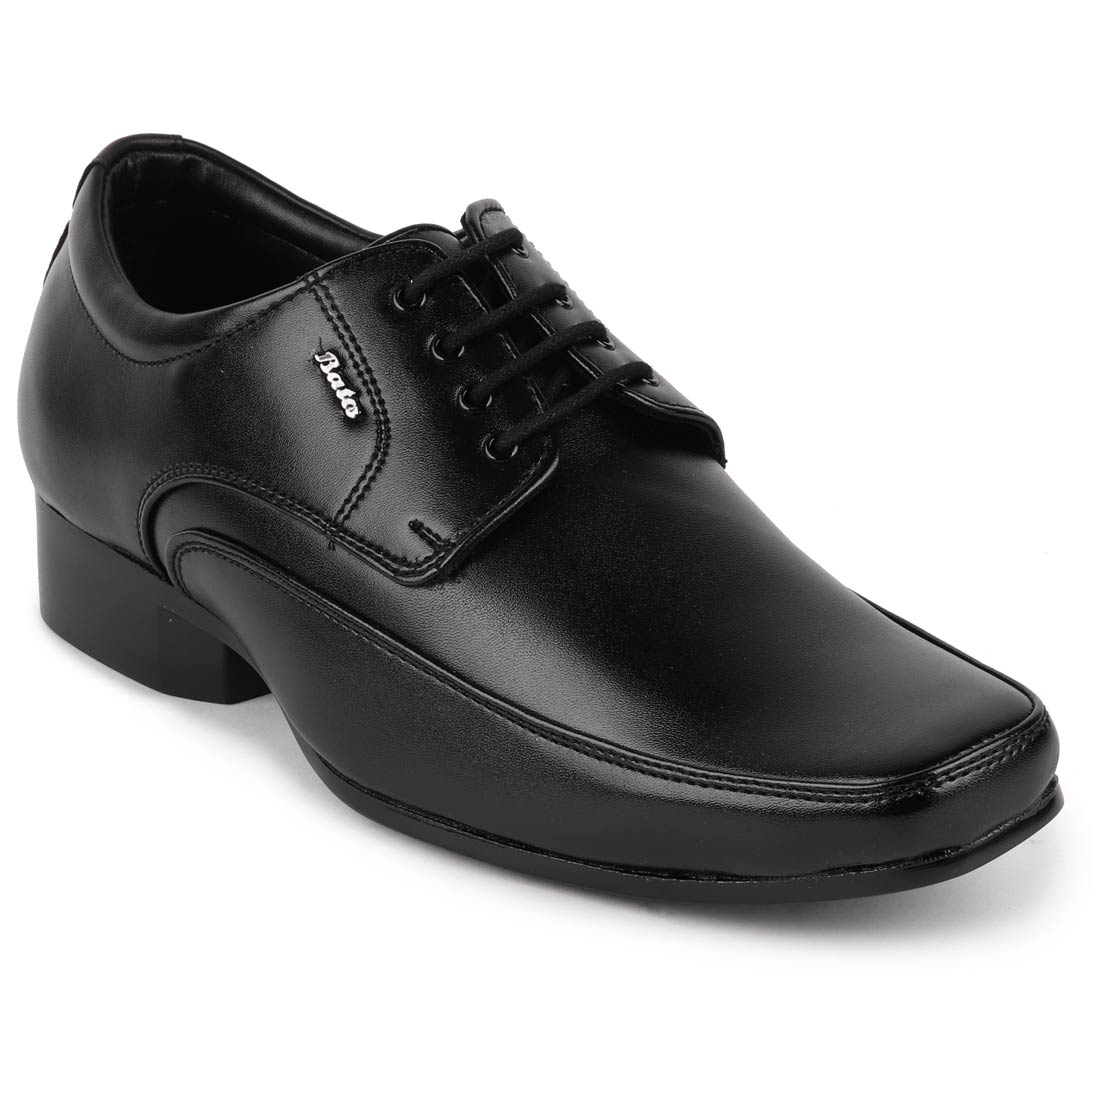 Buy Bata Remo Men Black Lace Up Formal Shoes Online @ ₹1159 from ShopClues